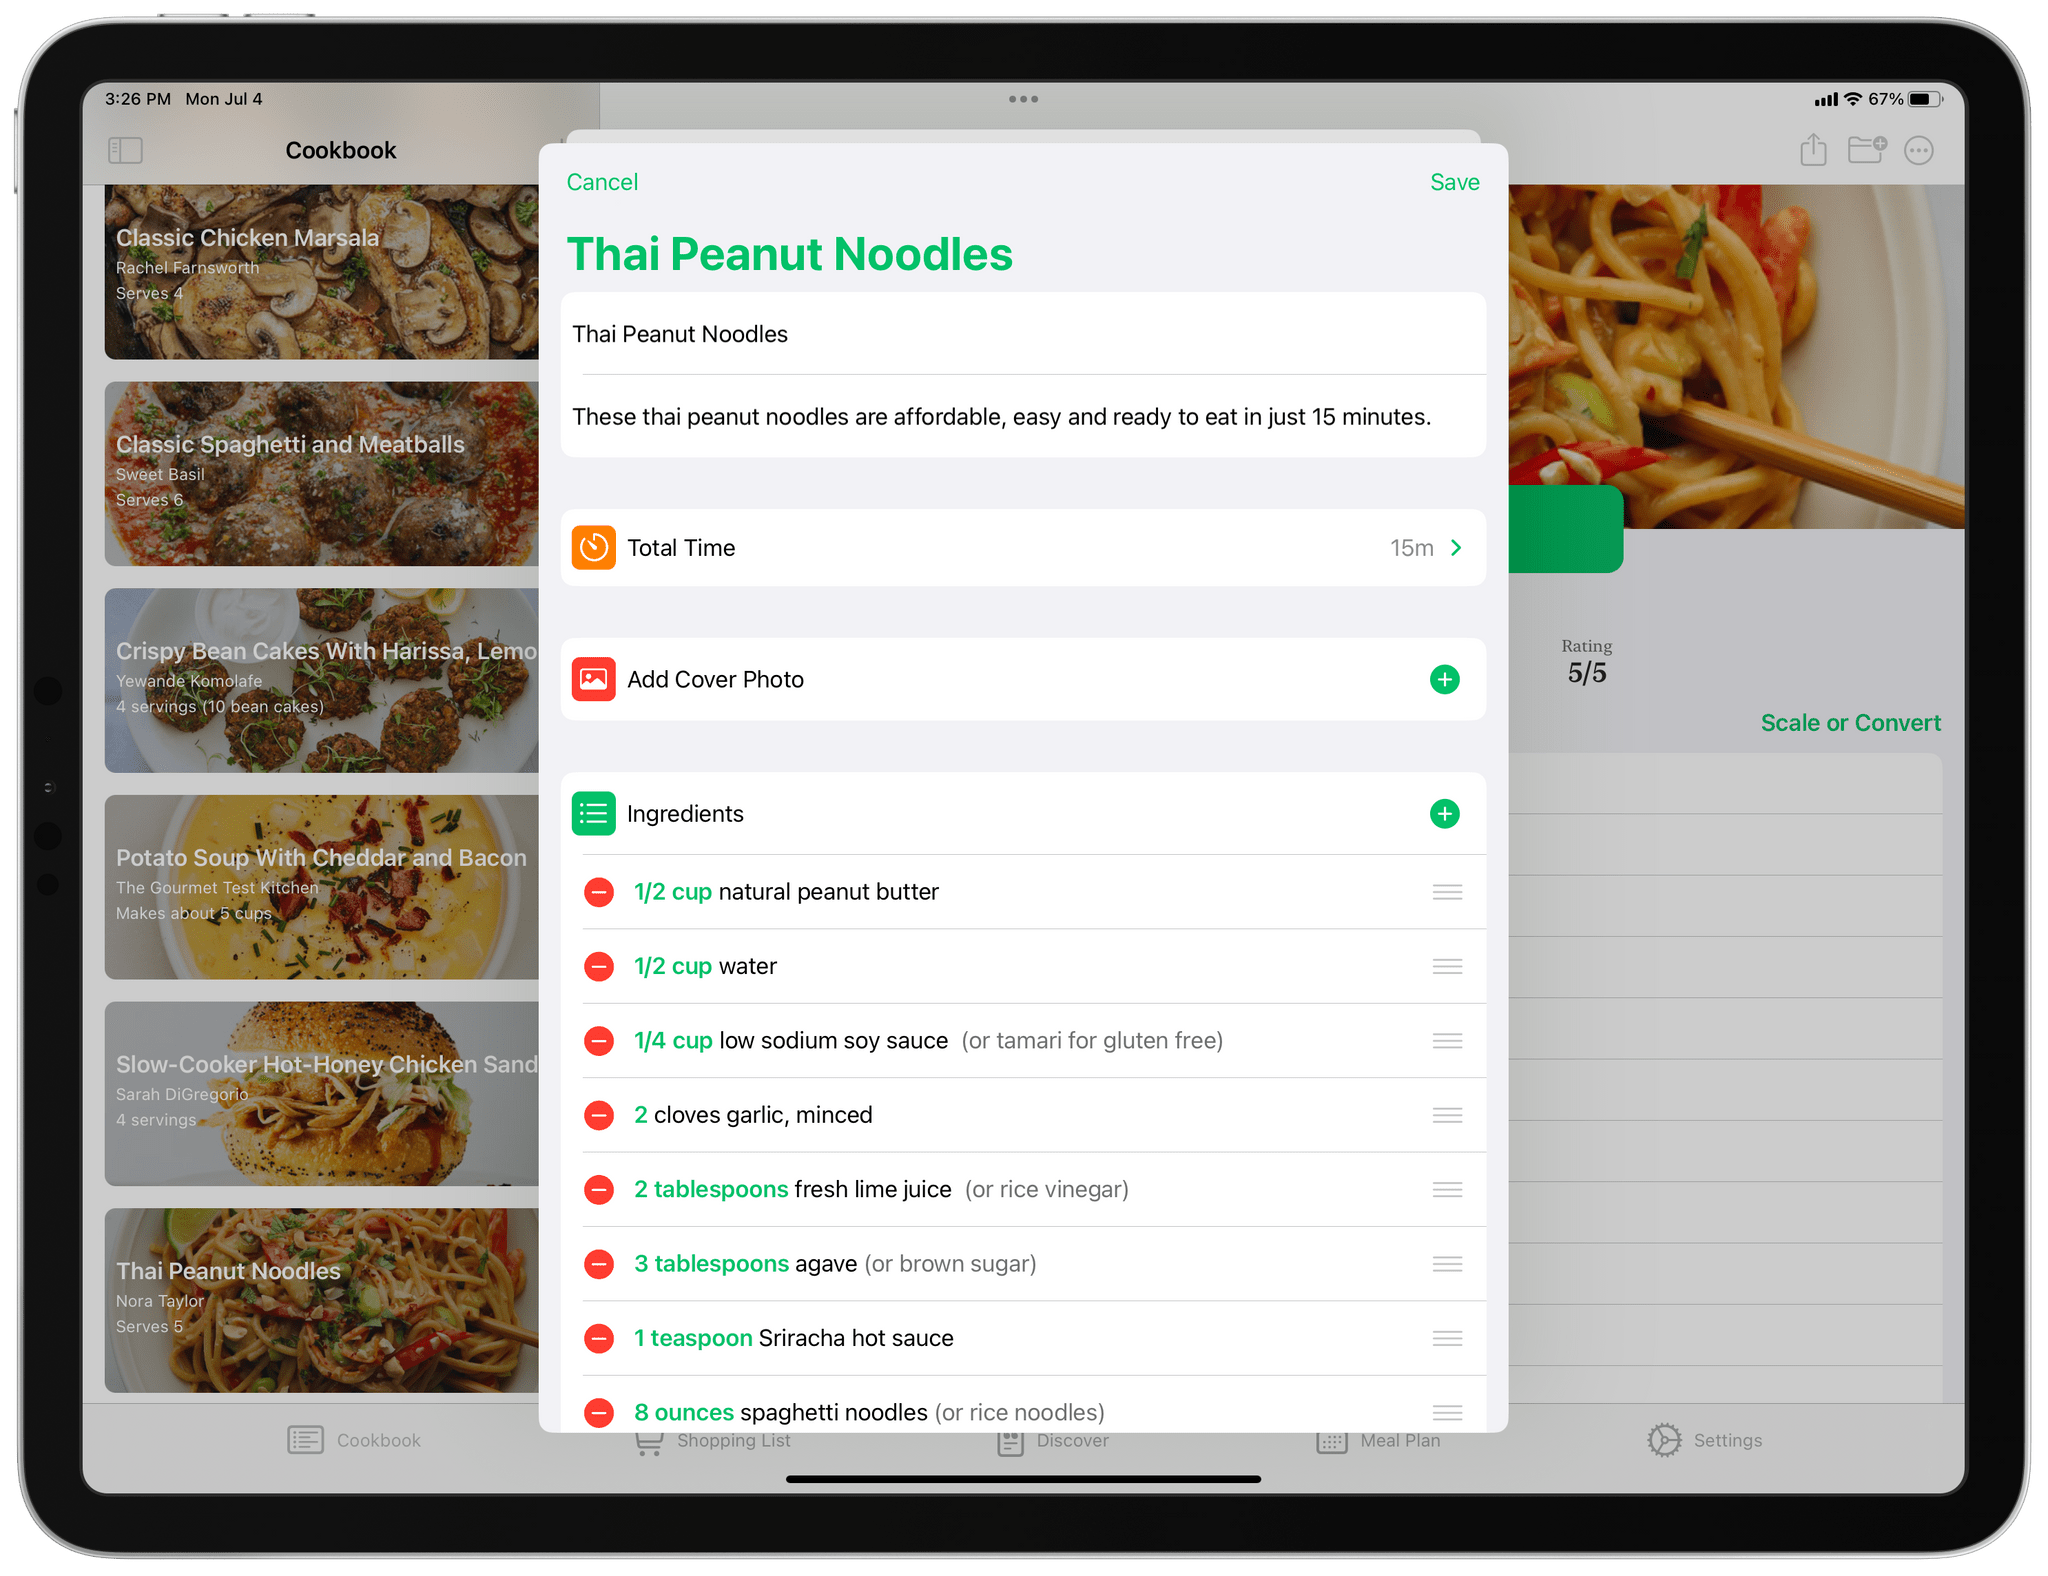 You can now edit a recipe before saving it as part of adding a new one.